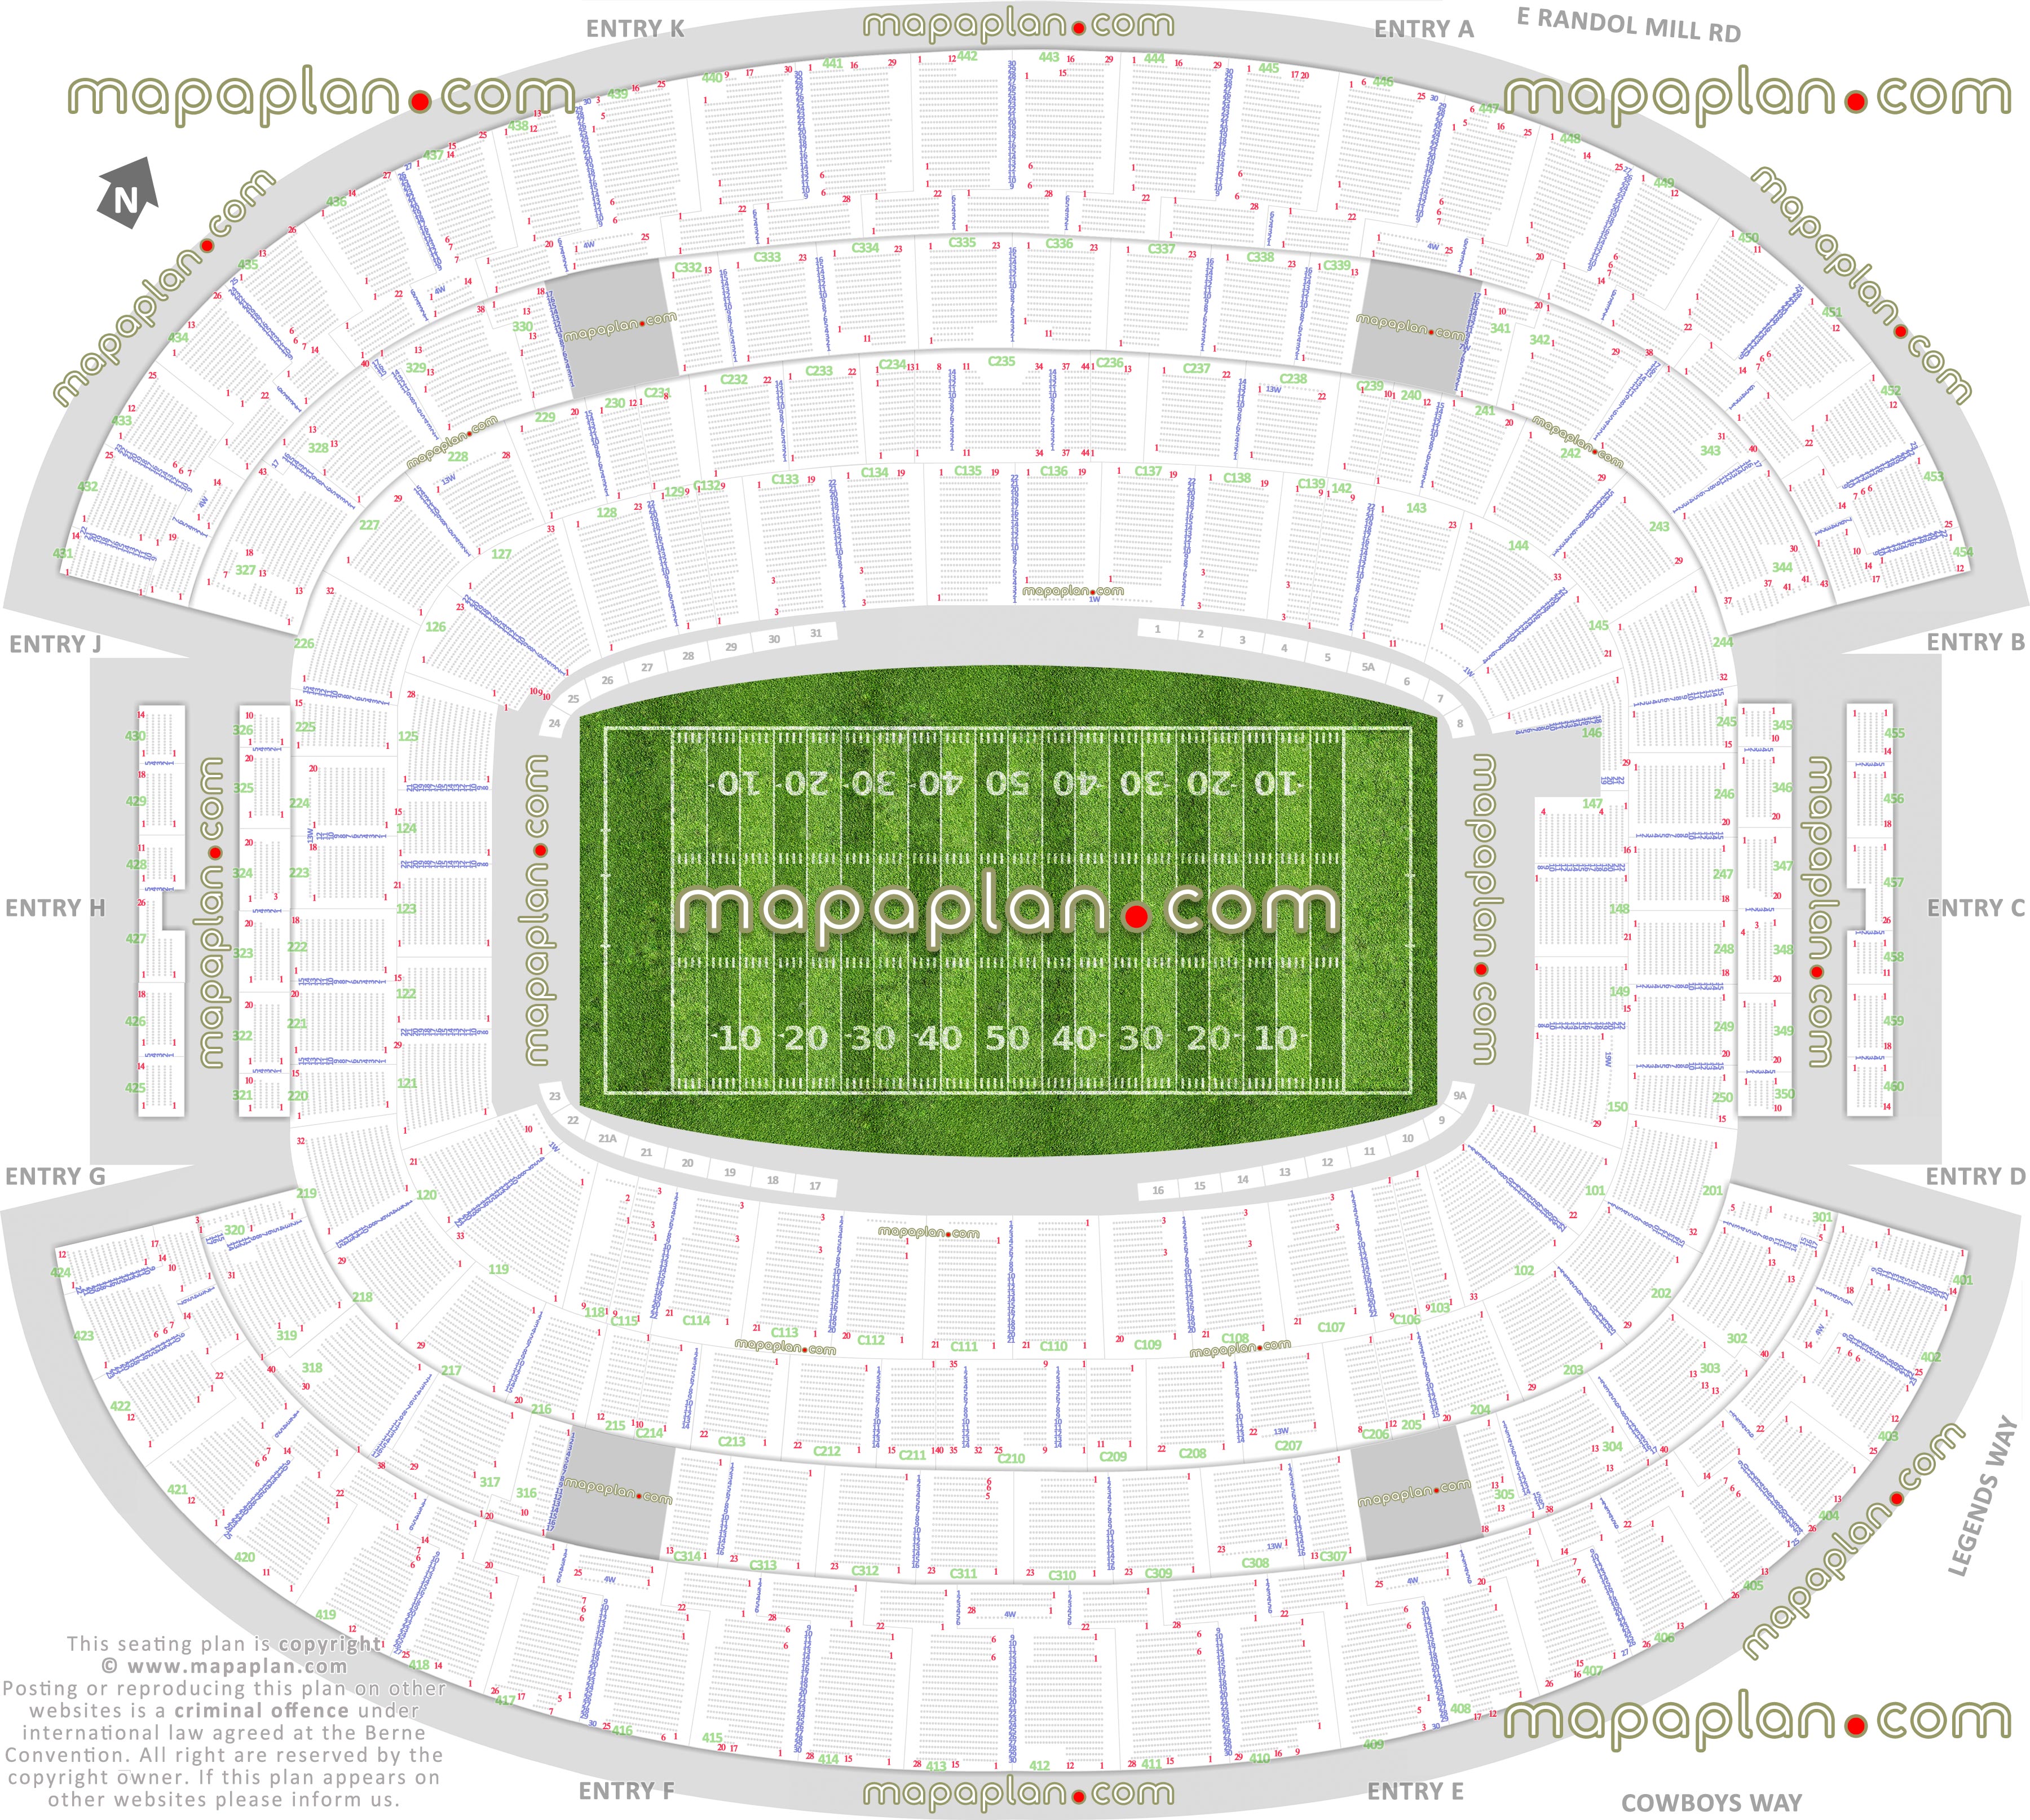 Dallas Cowboys Seating Chart With Seat Numbers